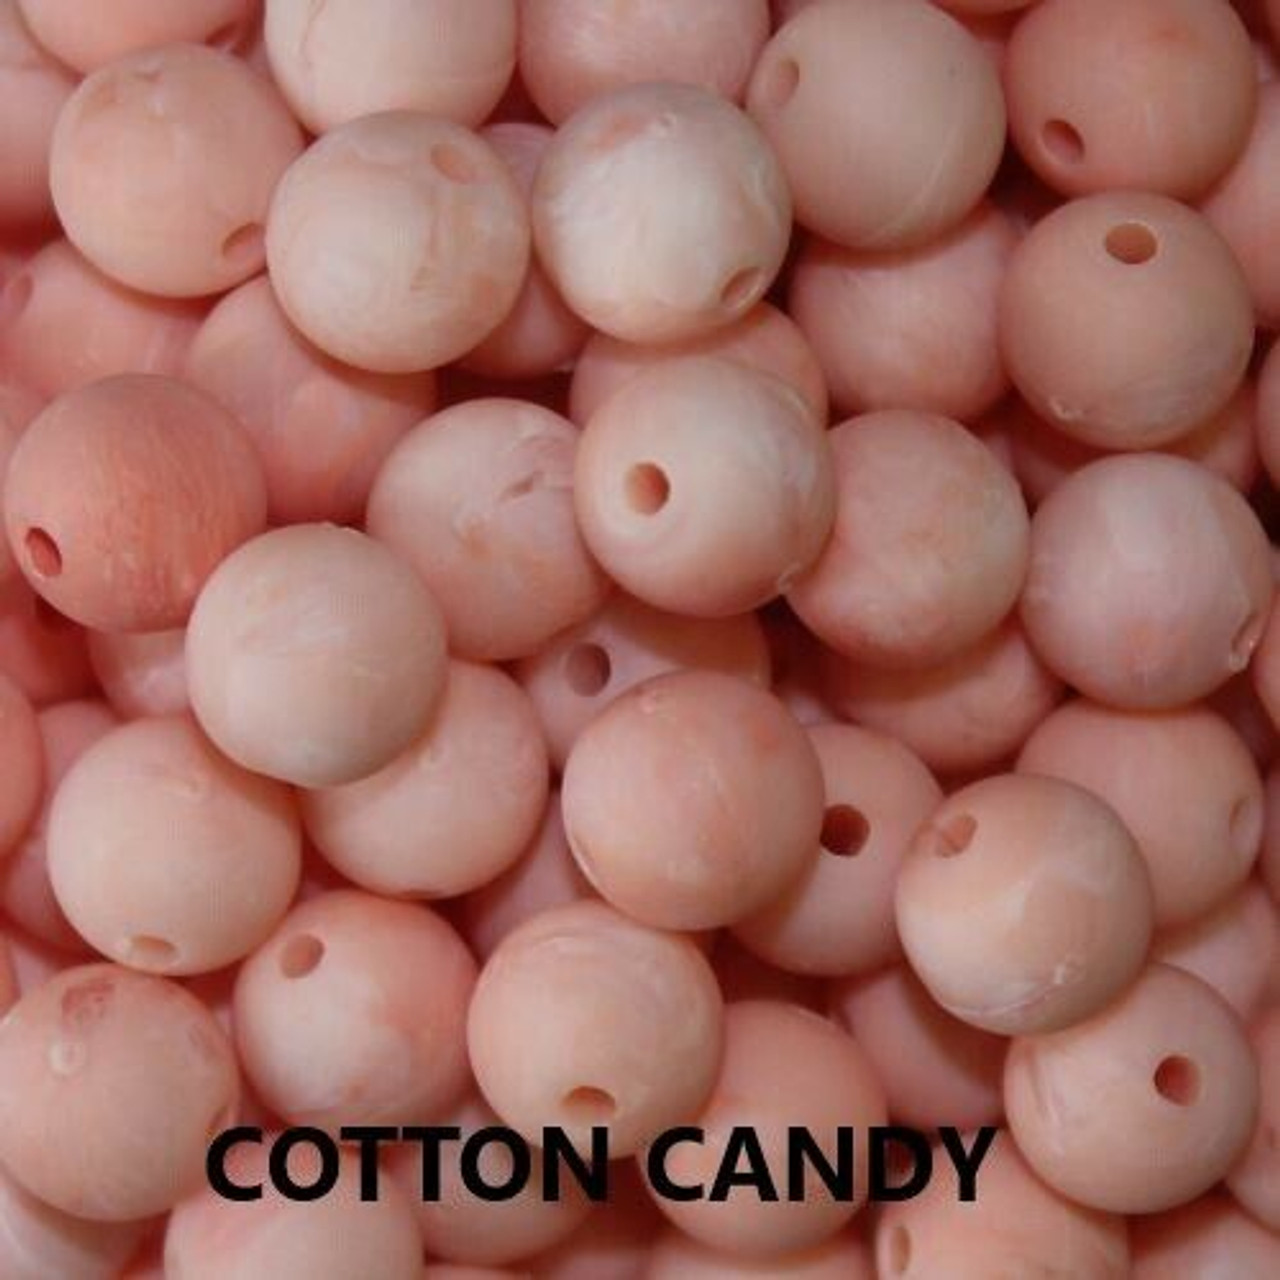 TroutBeads Fishing Bait Cotton Candy Sizes 6 8 10 mm